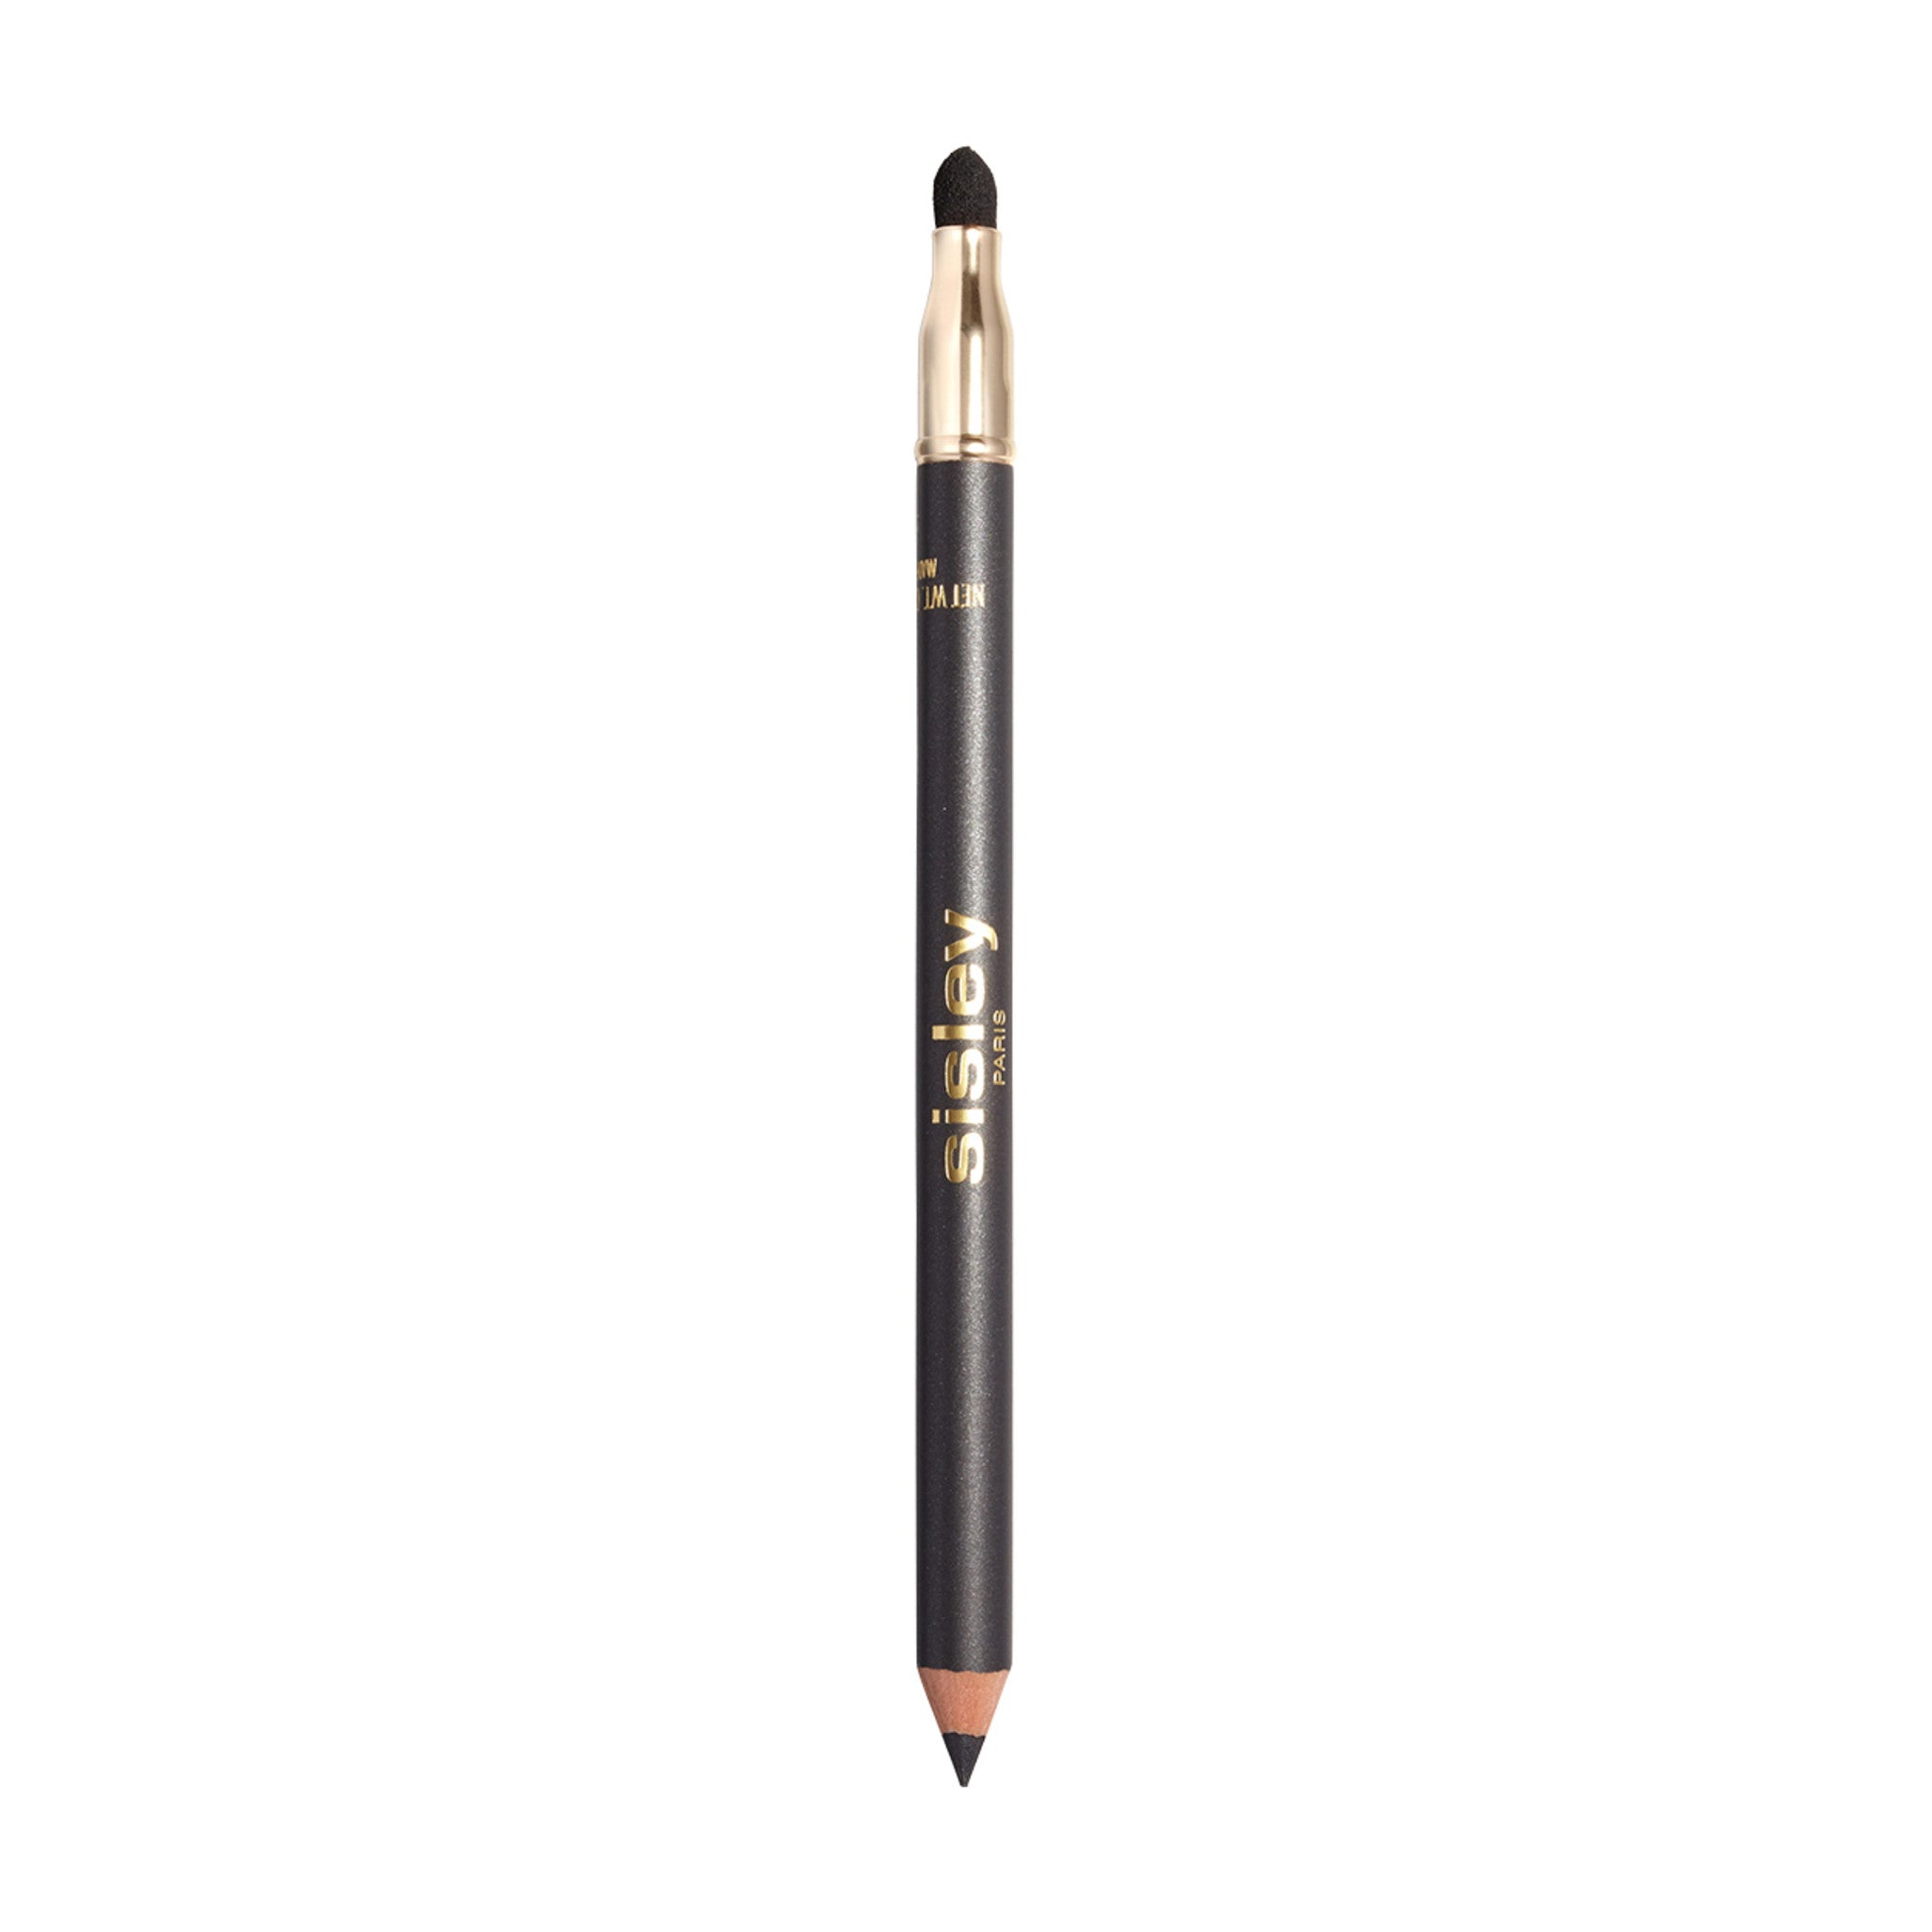 Sisley-Paris Phyto-Khol Perfect Eye Pencil Color/Shade variant: 3 Steel main image. This product is in the color gray